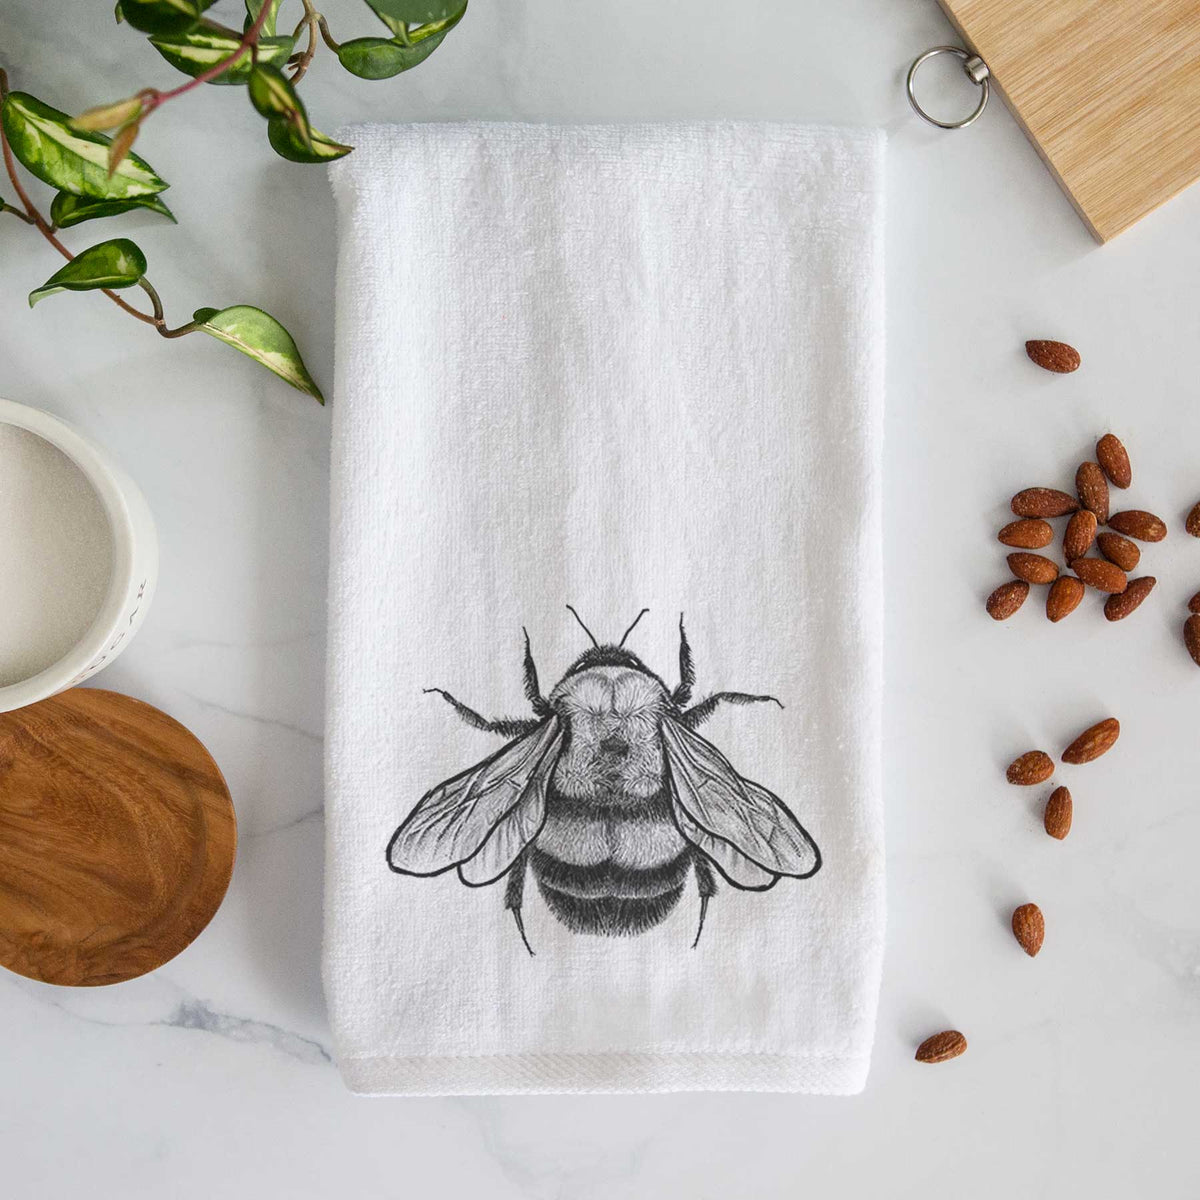 Bombus Affinis - Rusty-Patched Bumble Bee Hand Towel